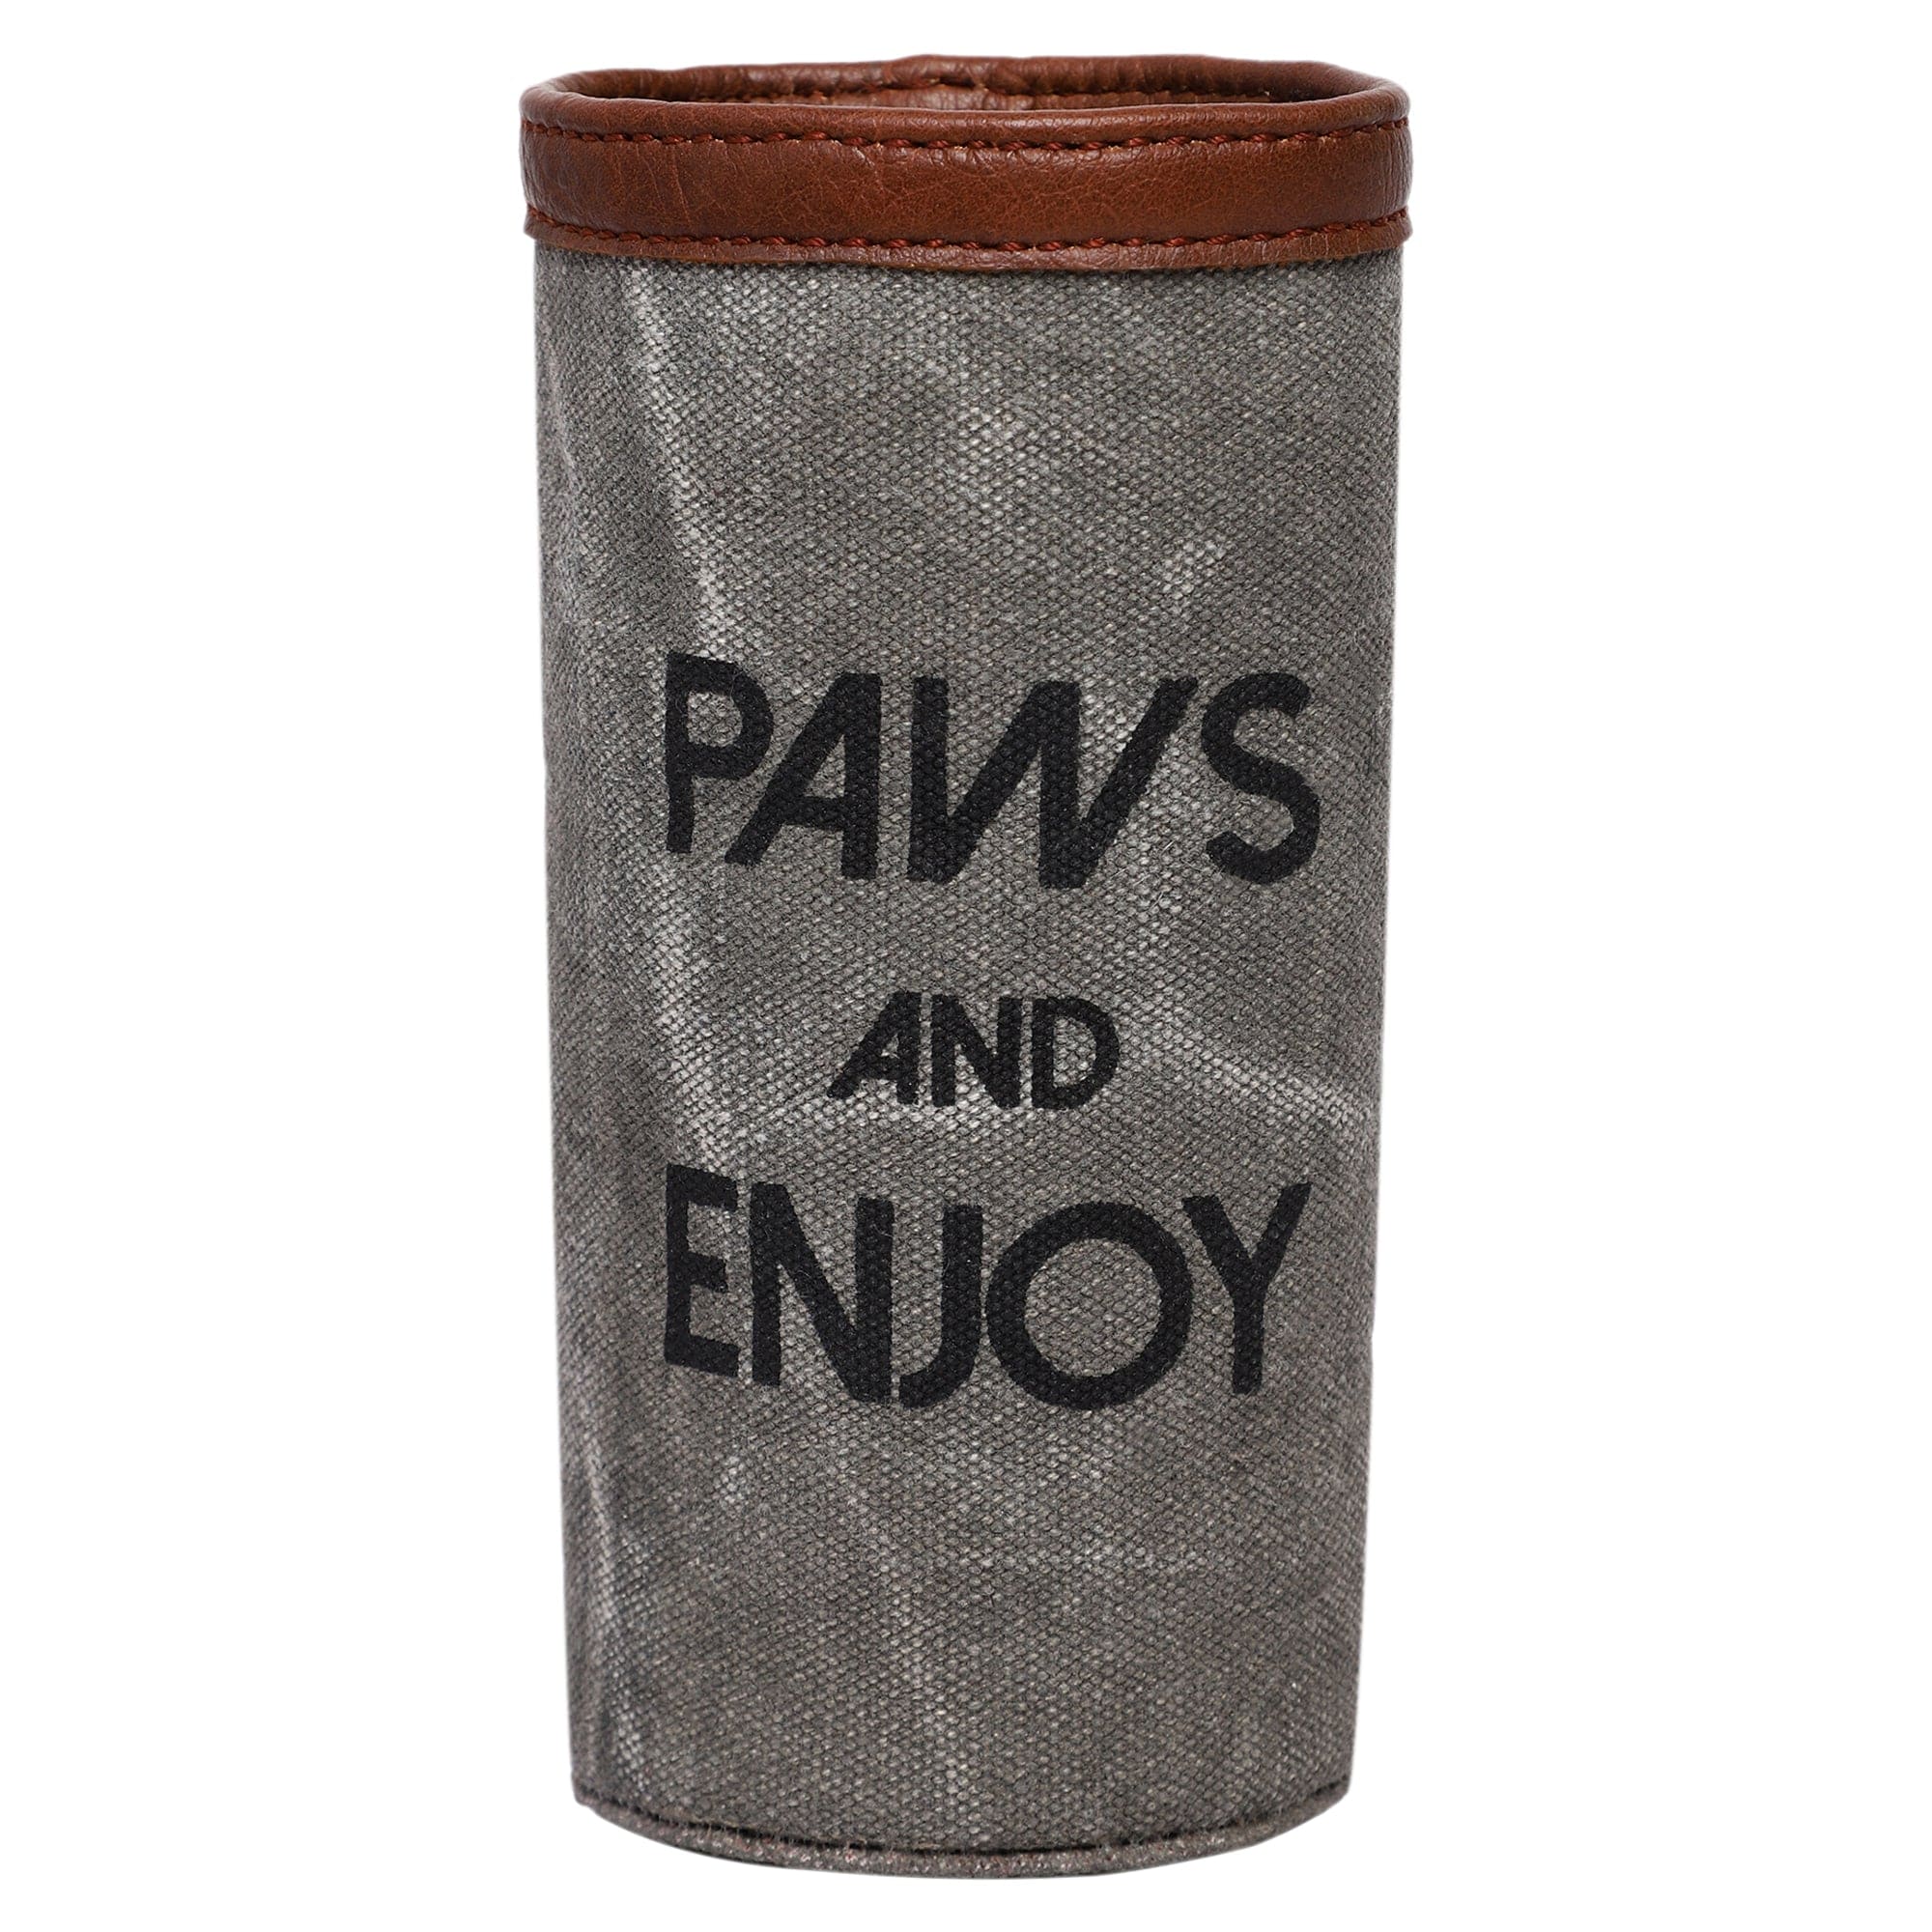 Mona-B Bag Mona B 500 ML Beer Can Cover with Stylish Design for Men and Women (Paws and Enjoy)